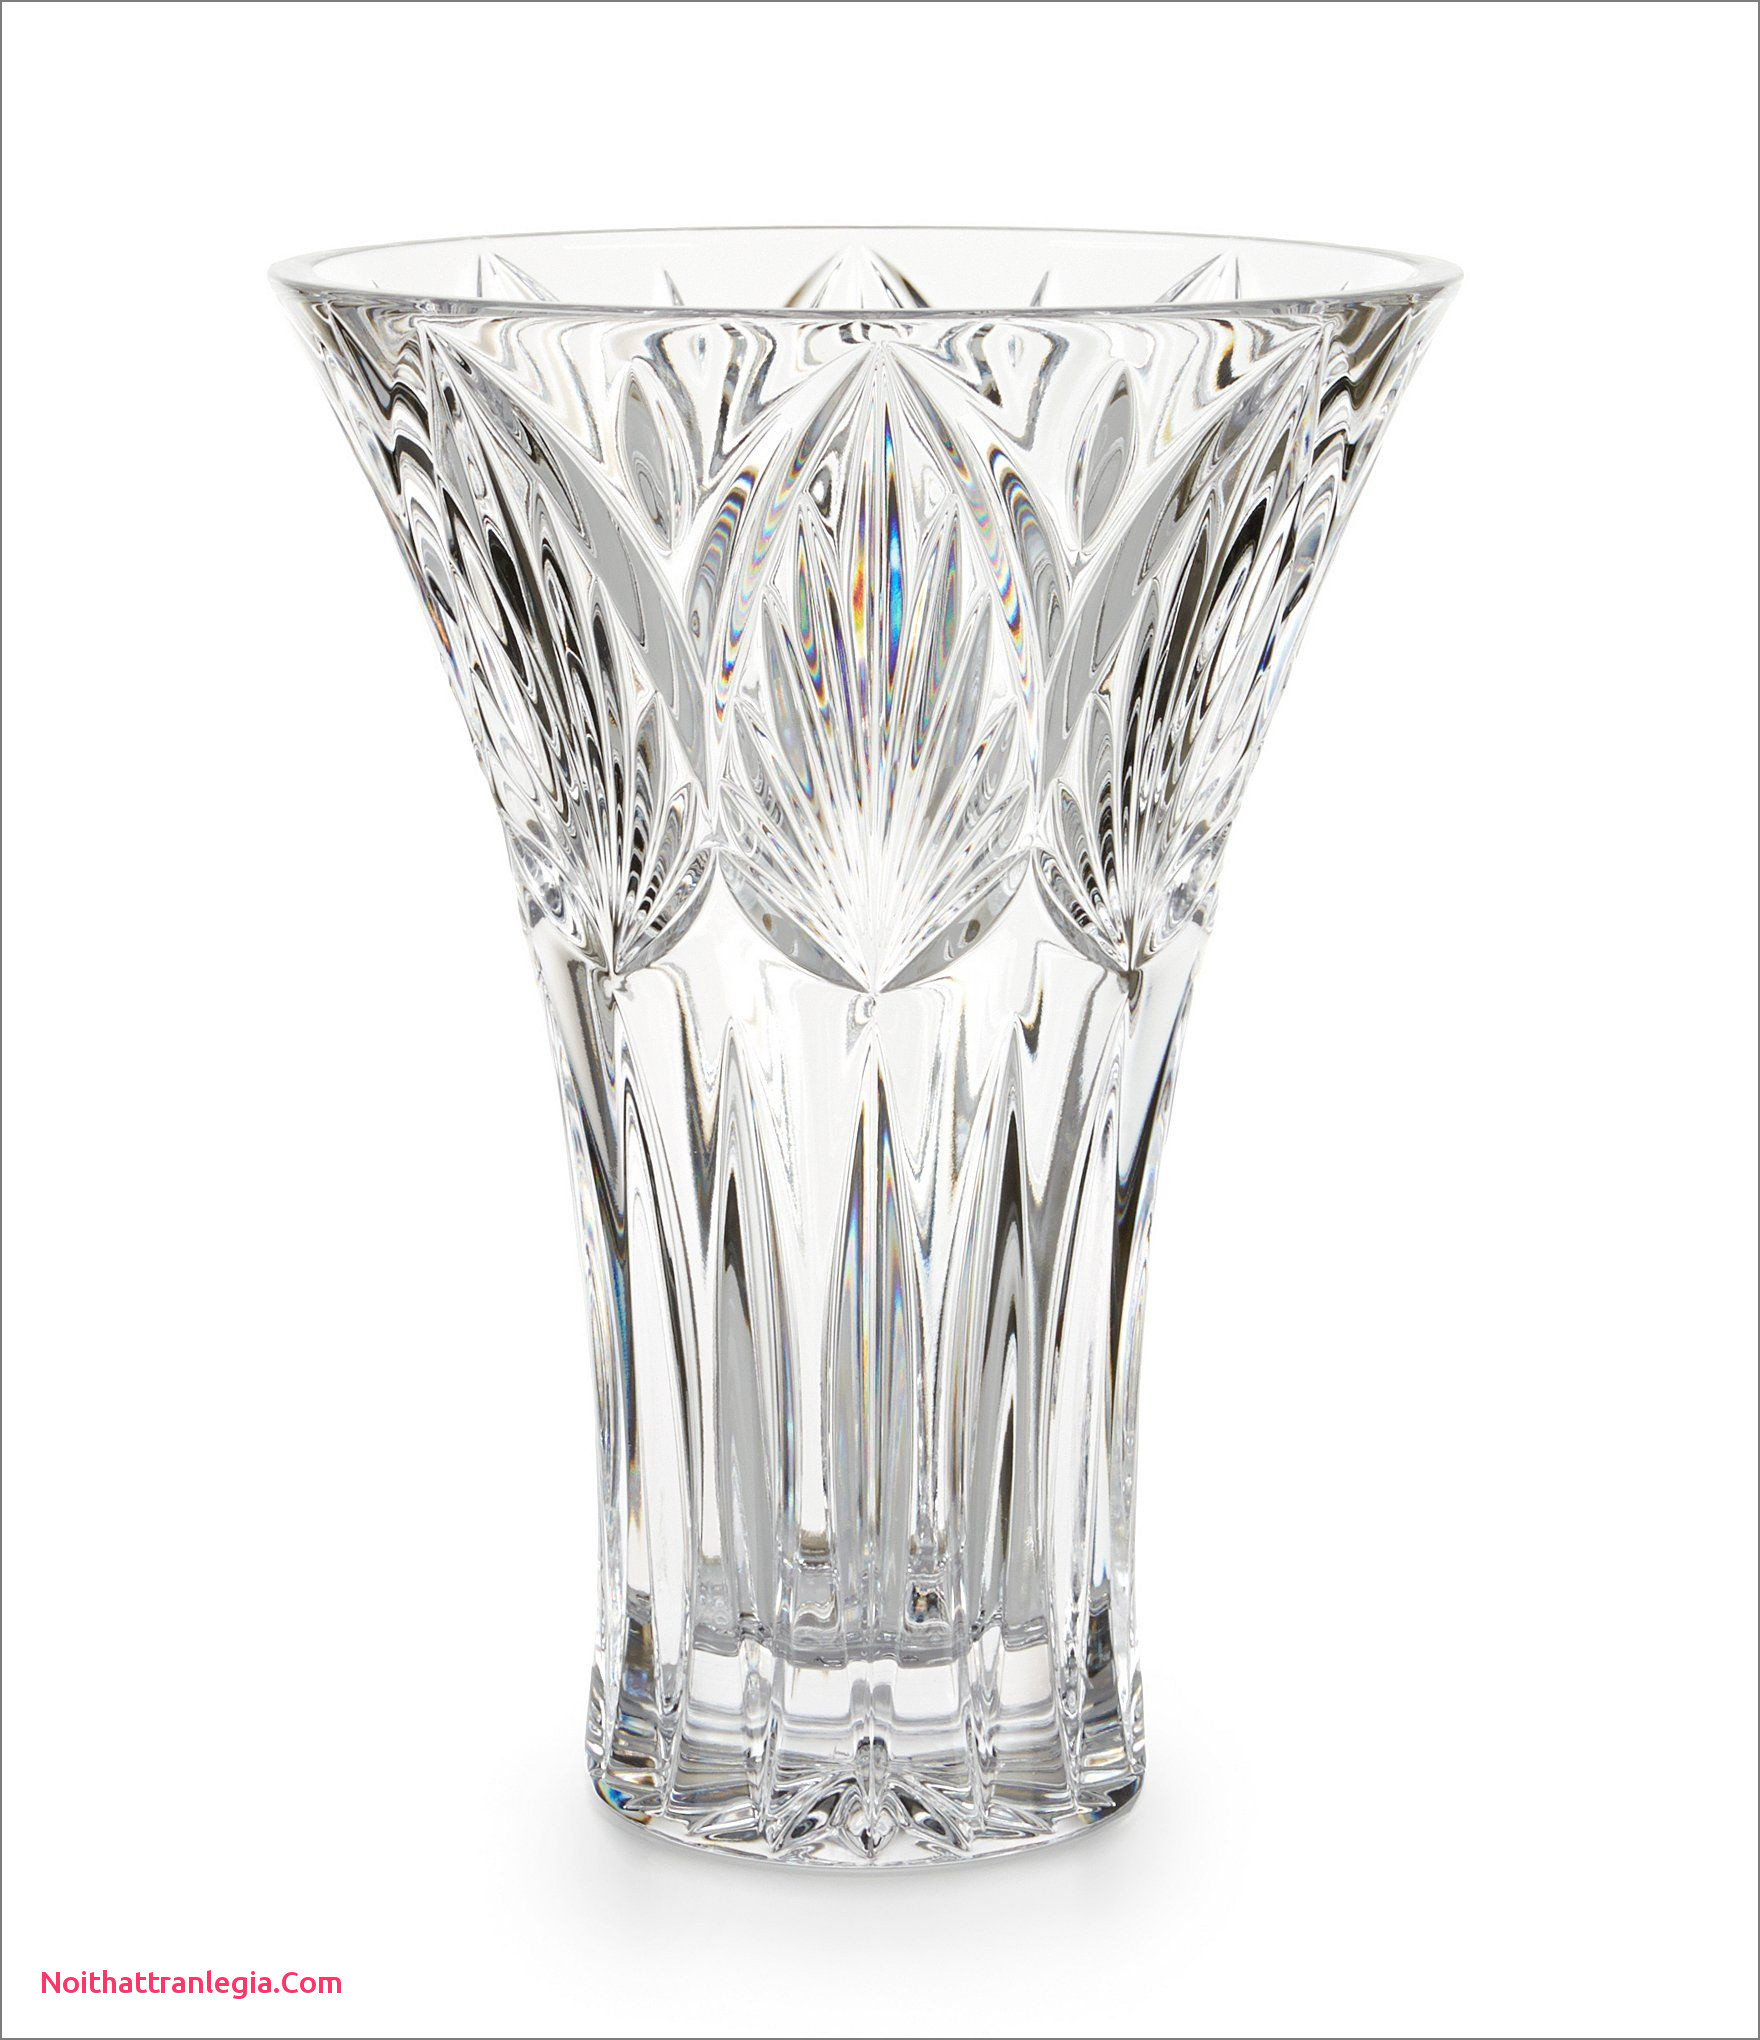 22 Trendy 24 Inch Vases Cheap 2024 free download 24 inch vases cheap of 20 large waterford crystal vase noithattranlegia vases design throughout large waterford crystal vase best of waterford westbridge crystal vase of large waterford crys